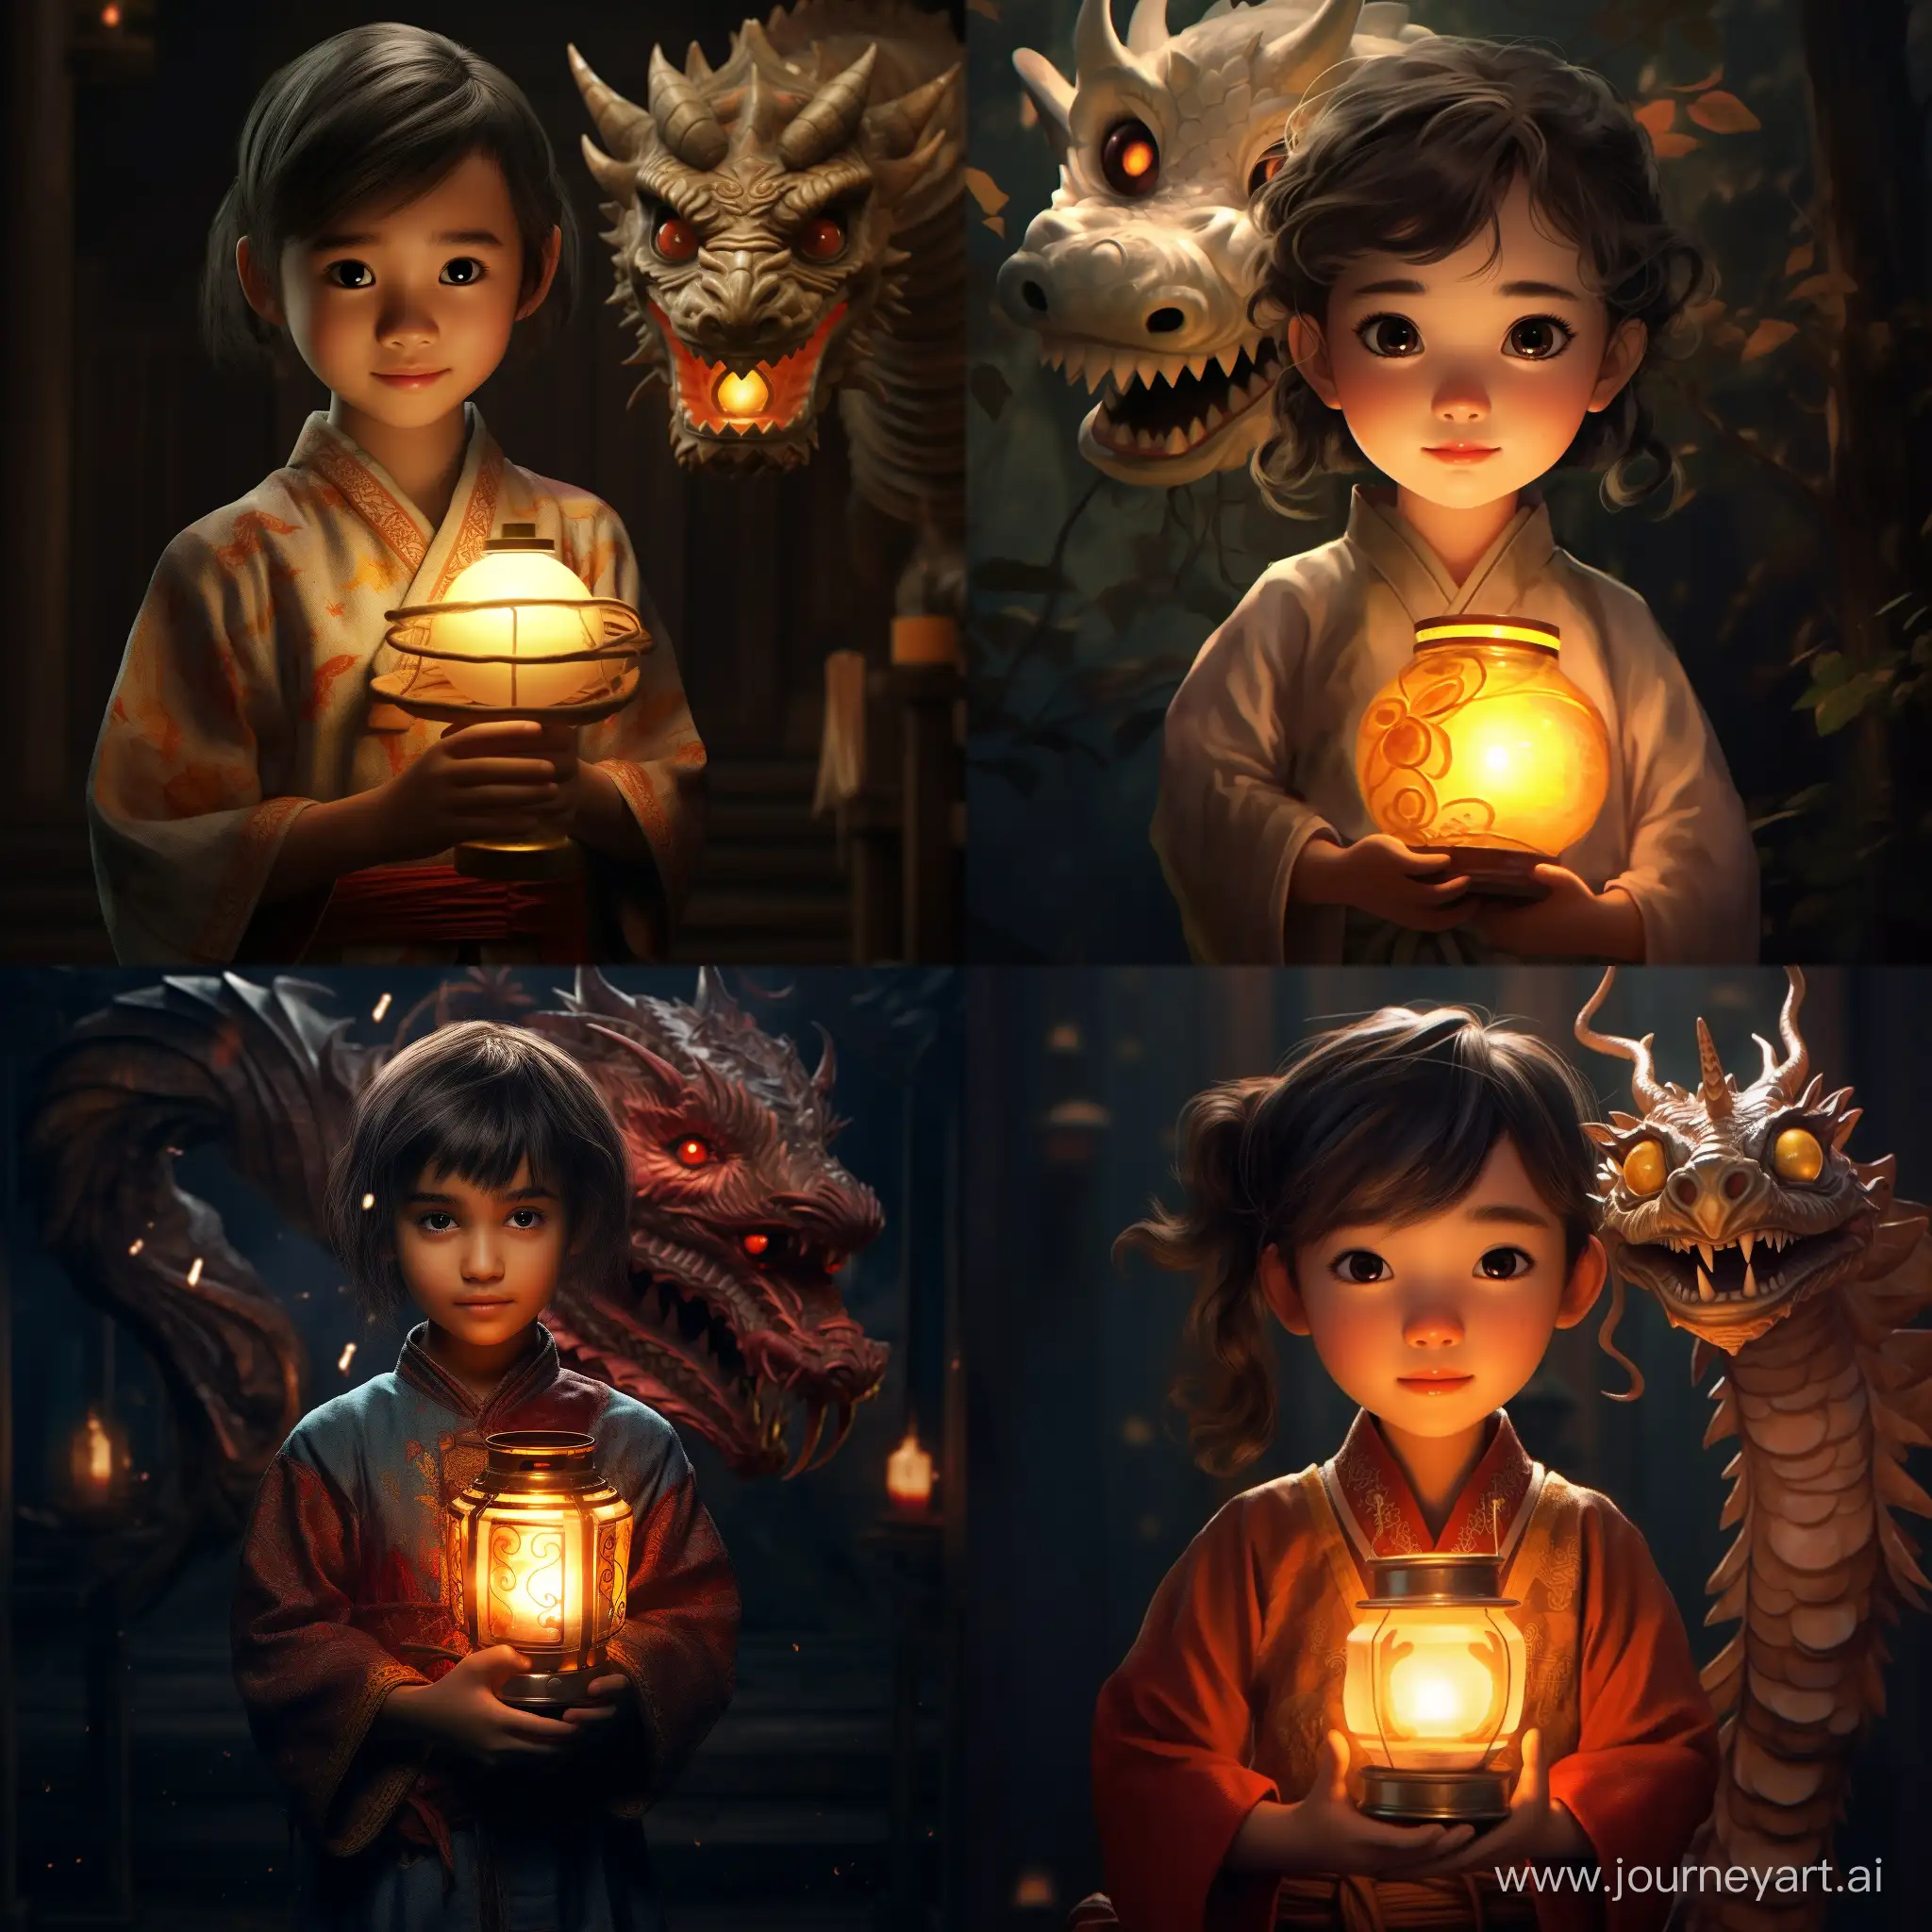 Young-Girl-Holding-Dragon-Lantern-at-Night-Festival